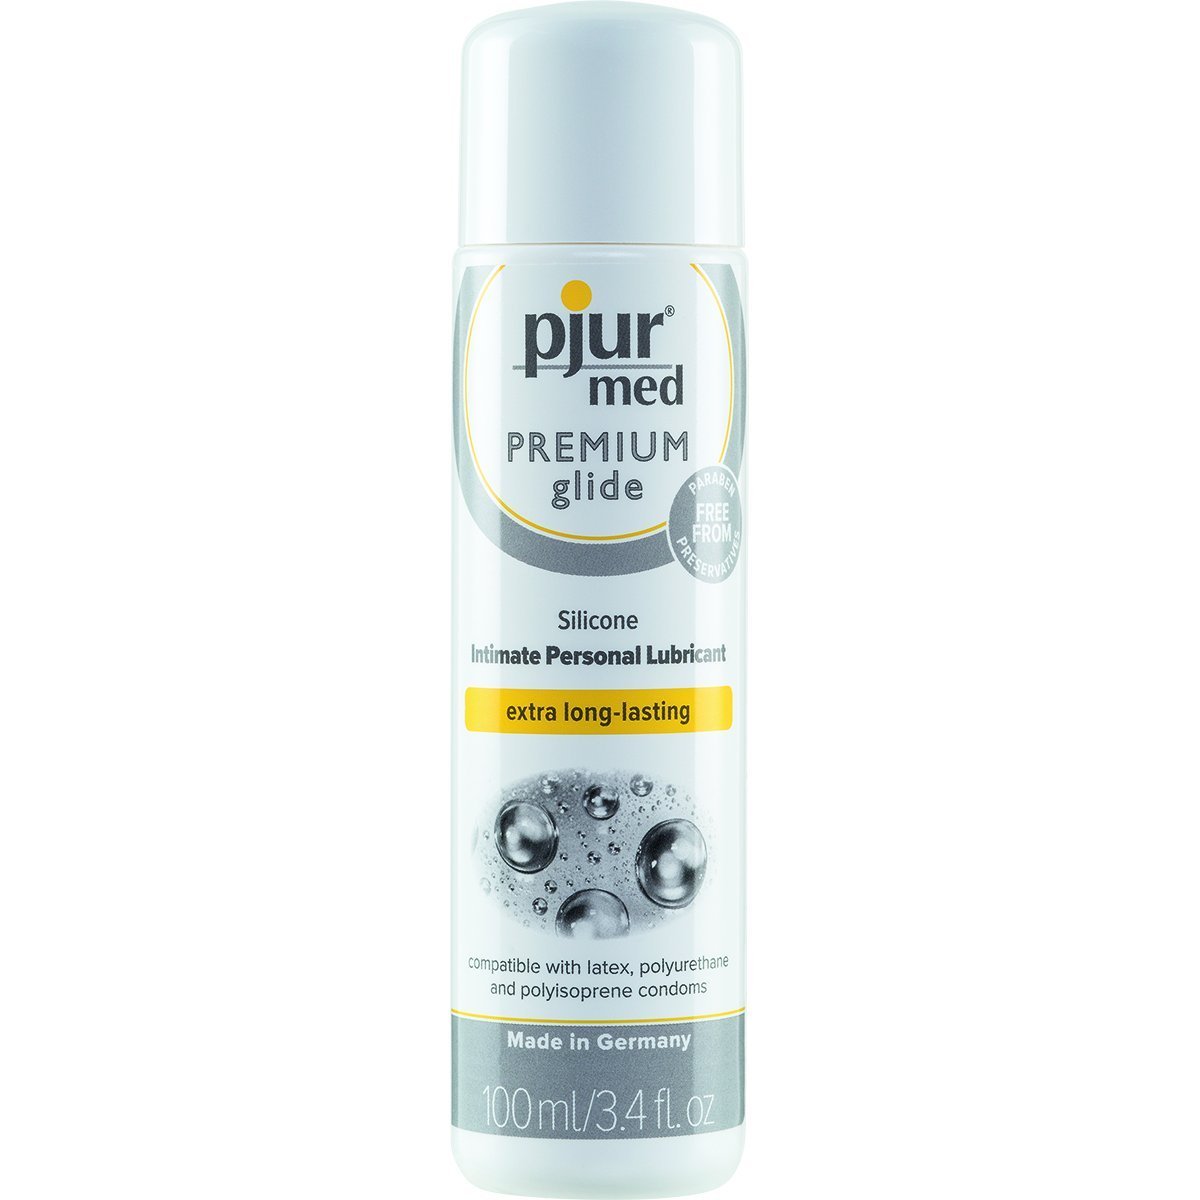 Pjur Med Premium Silicone Based Lubricant - 3.4 oz - Lube, Toy Care and Better Sex